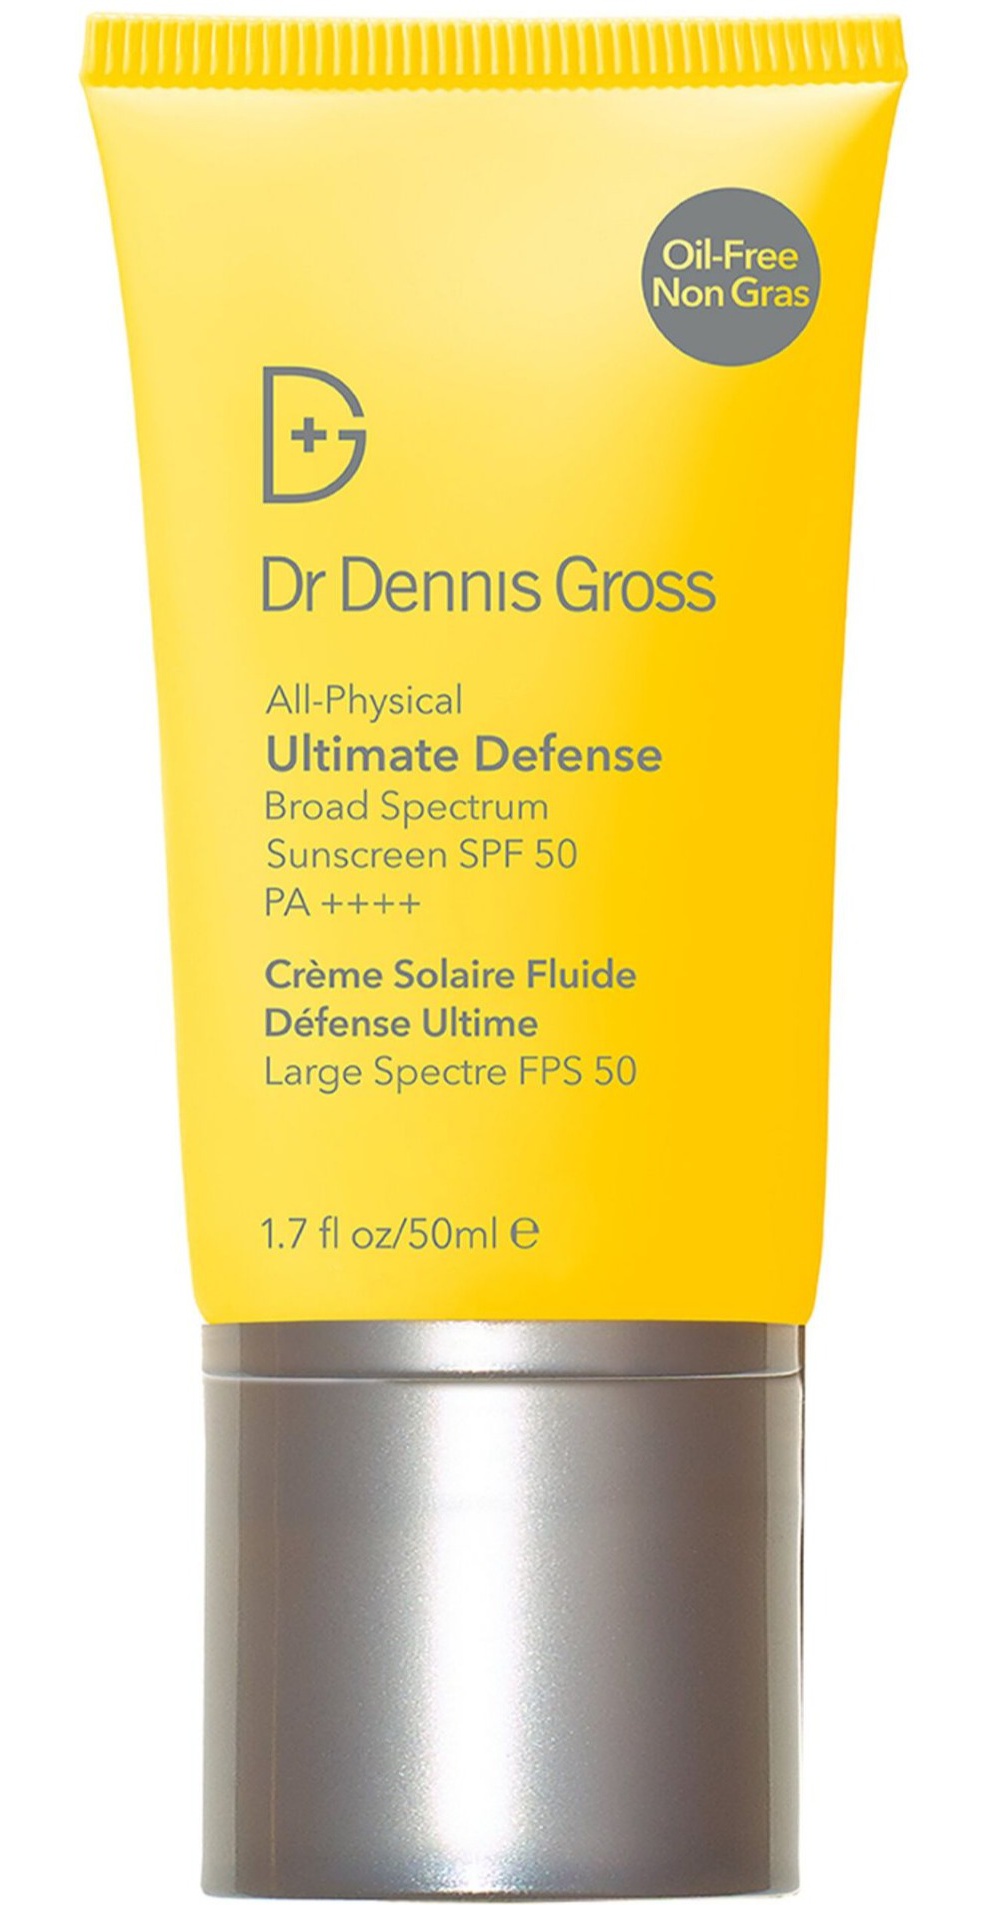 Dr Dennis Gross All-physical Ultimate Defense Broad Spectrum Sunscreen SPF 50 Pa++++